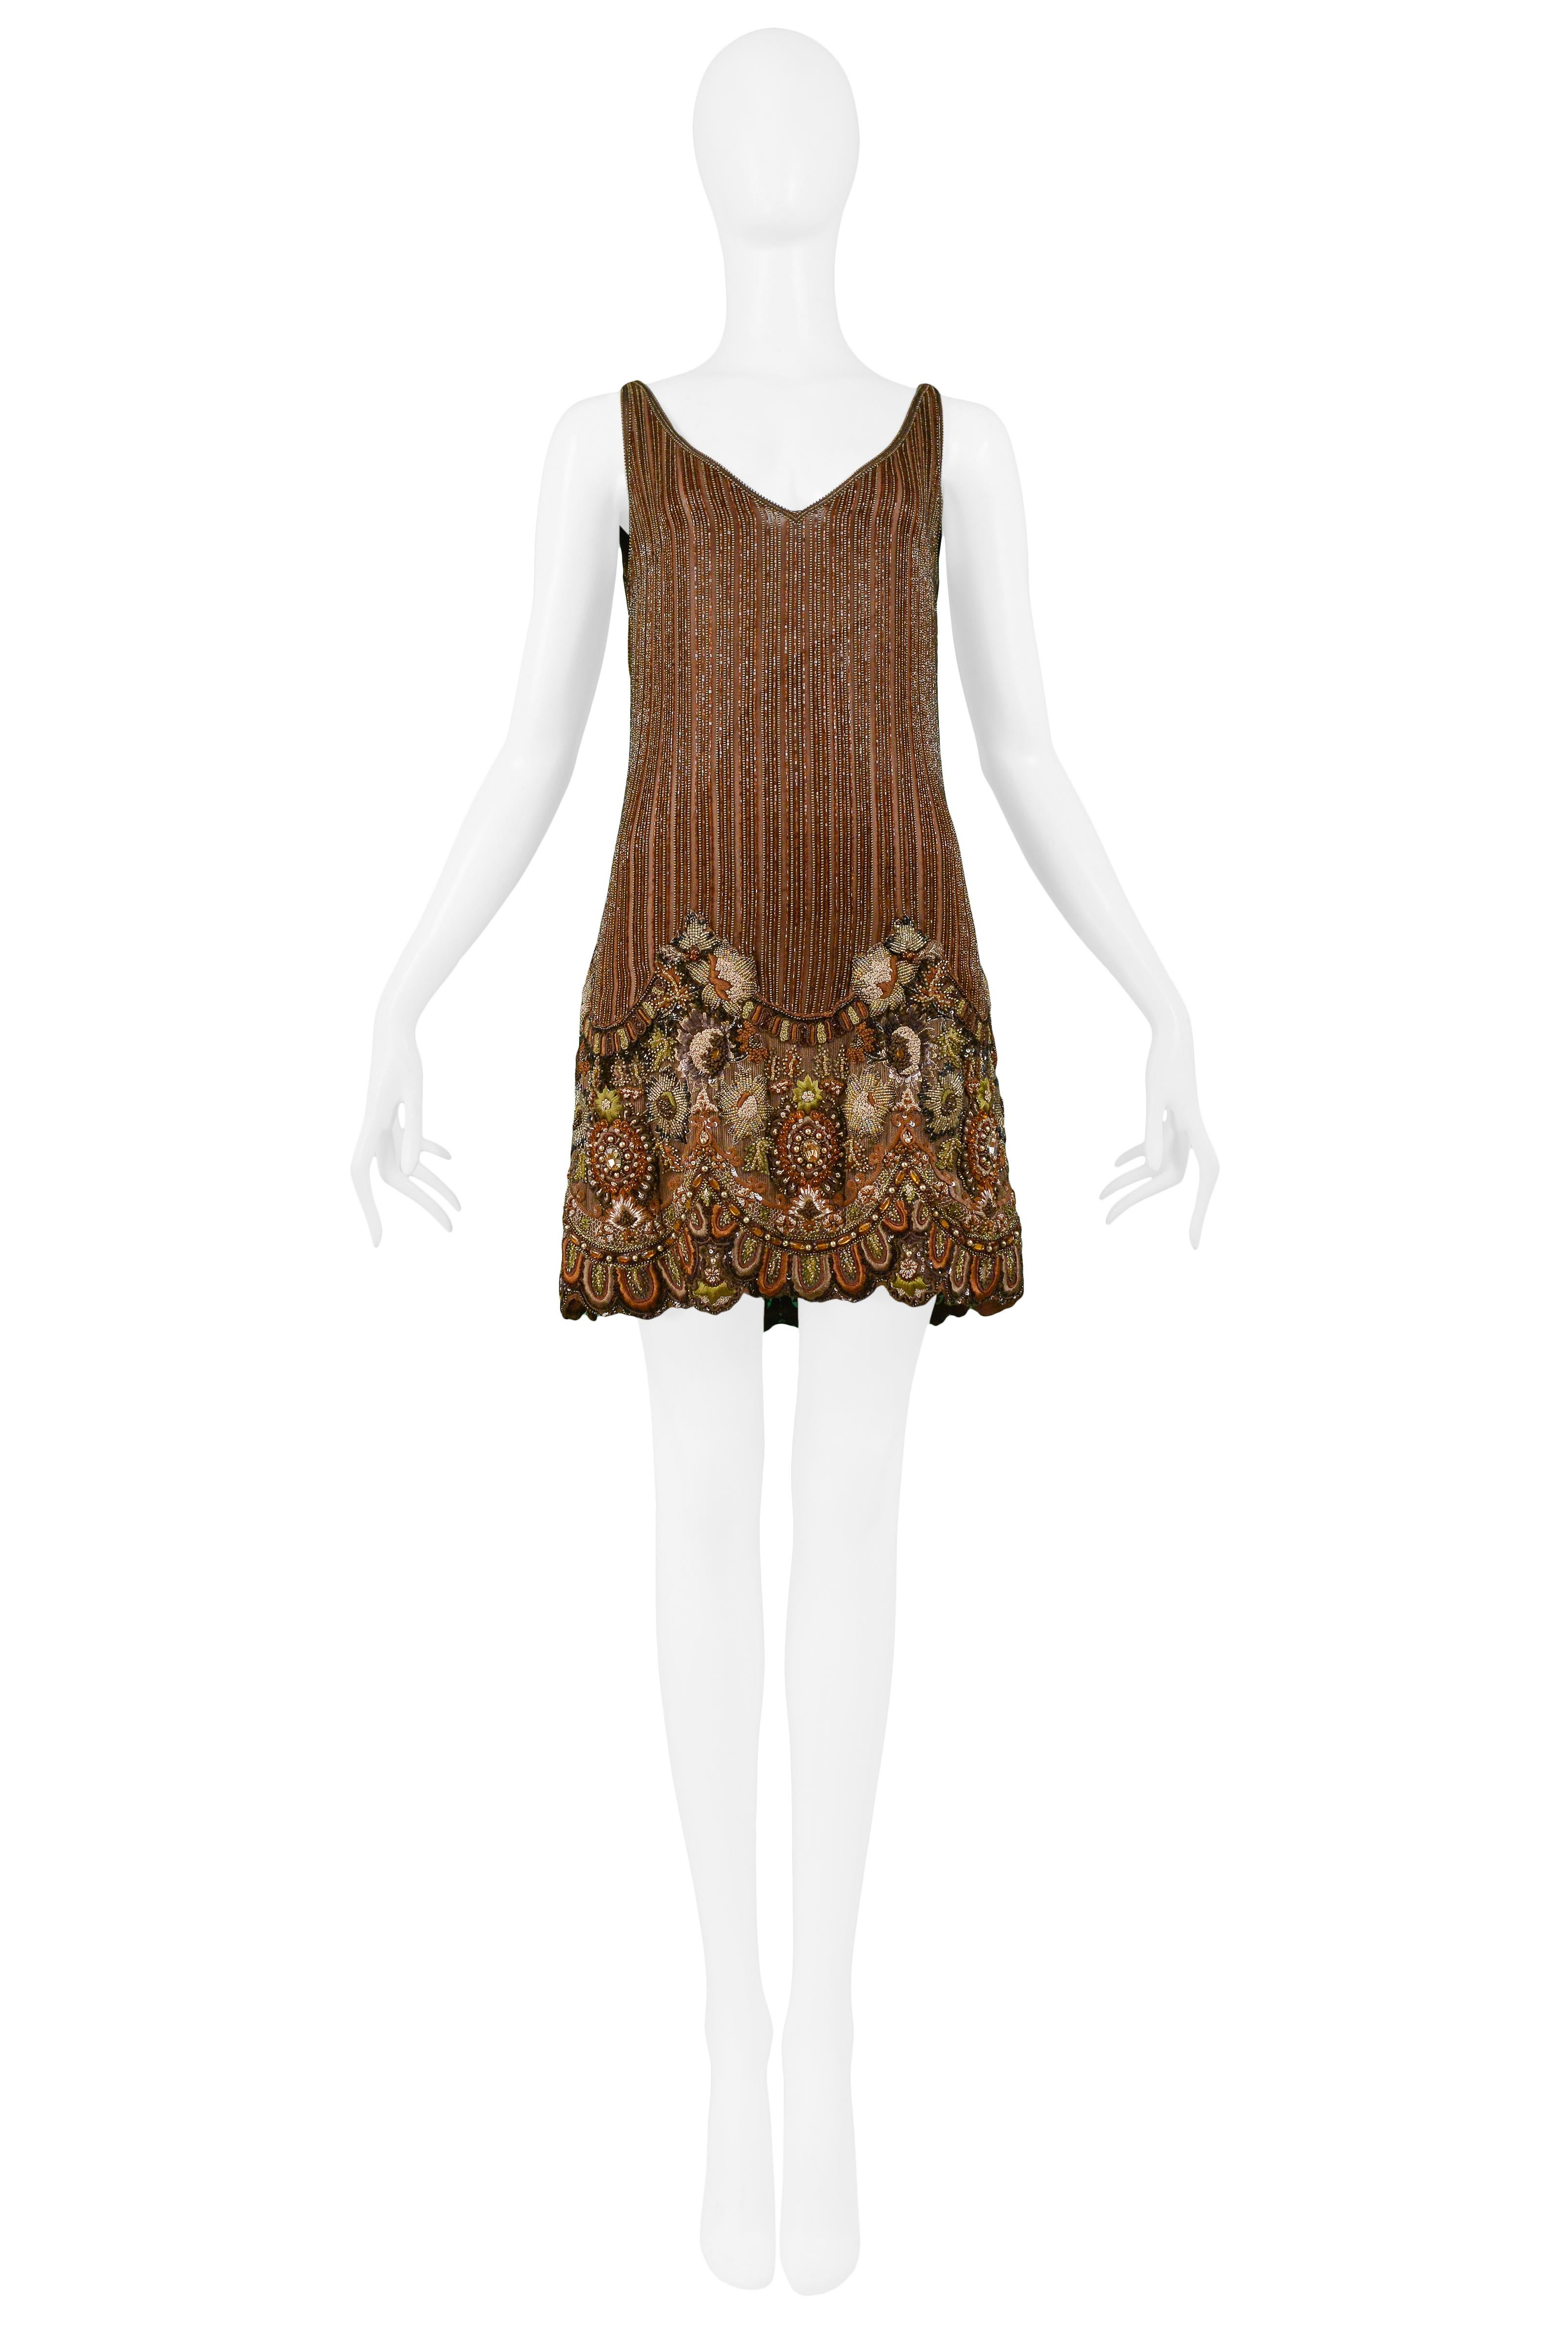 Resurrection Vintage is excited to offer a vintage Valentino caramel brown tank dress with a v-neckline, low cut back, and striped beading with intricate green, rust & caramel brown floral beadwork at the hem, and a center back